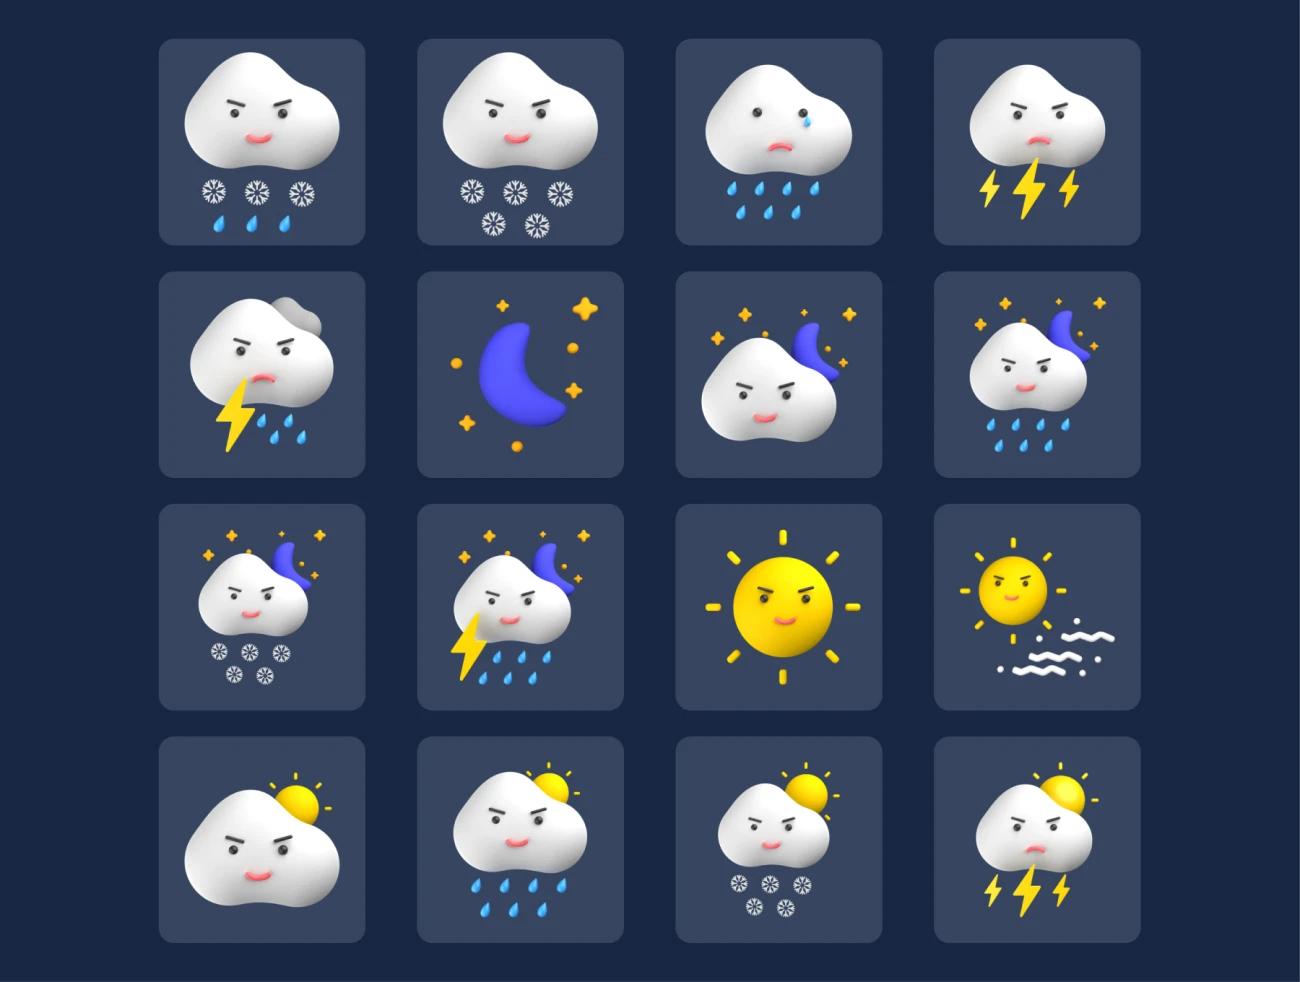 3D拟人情绪化天气图标24款素材下载 3D Weather Icons Emoticons Pack .figma .png .psd插图3